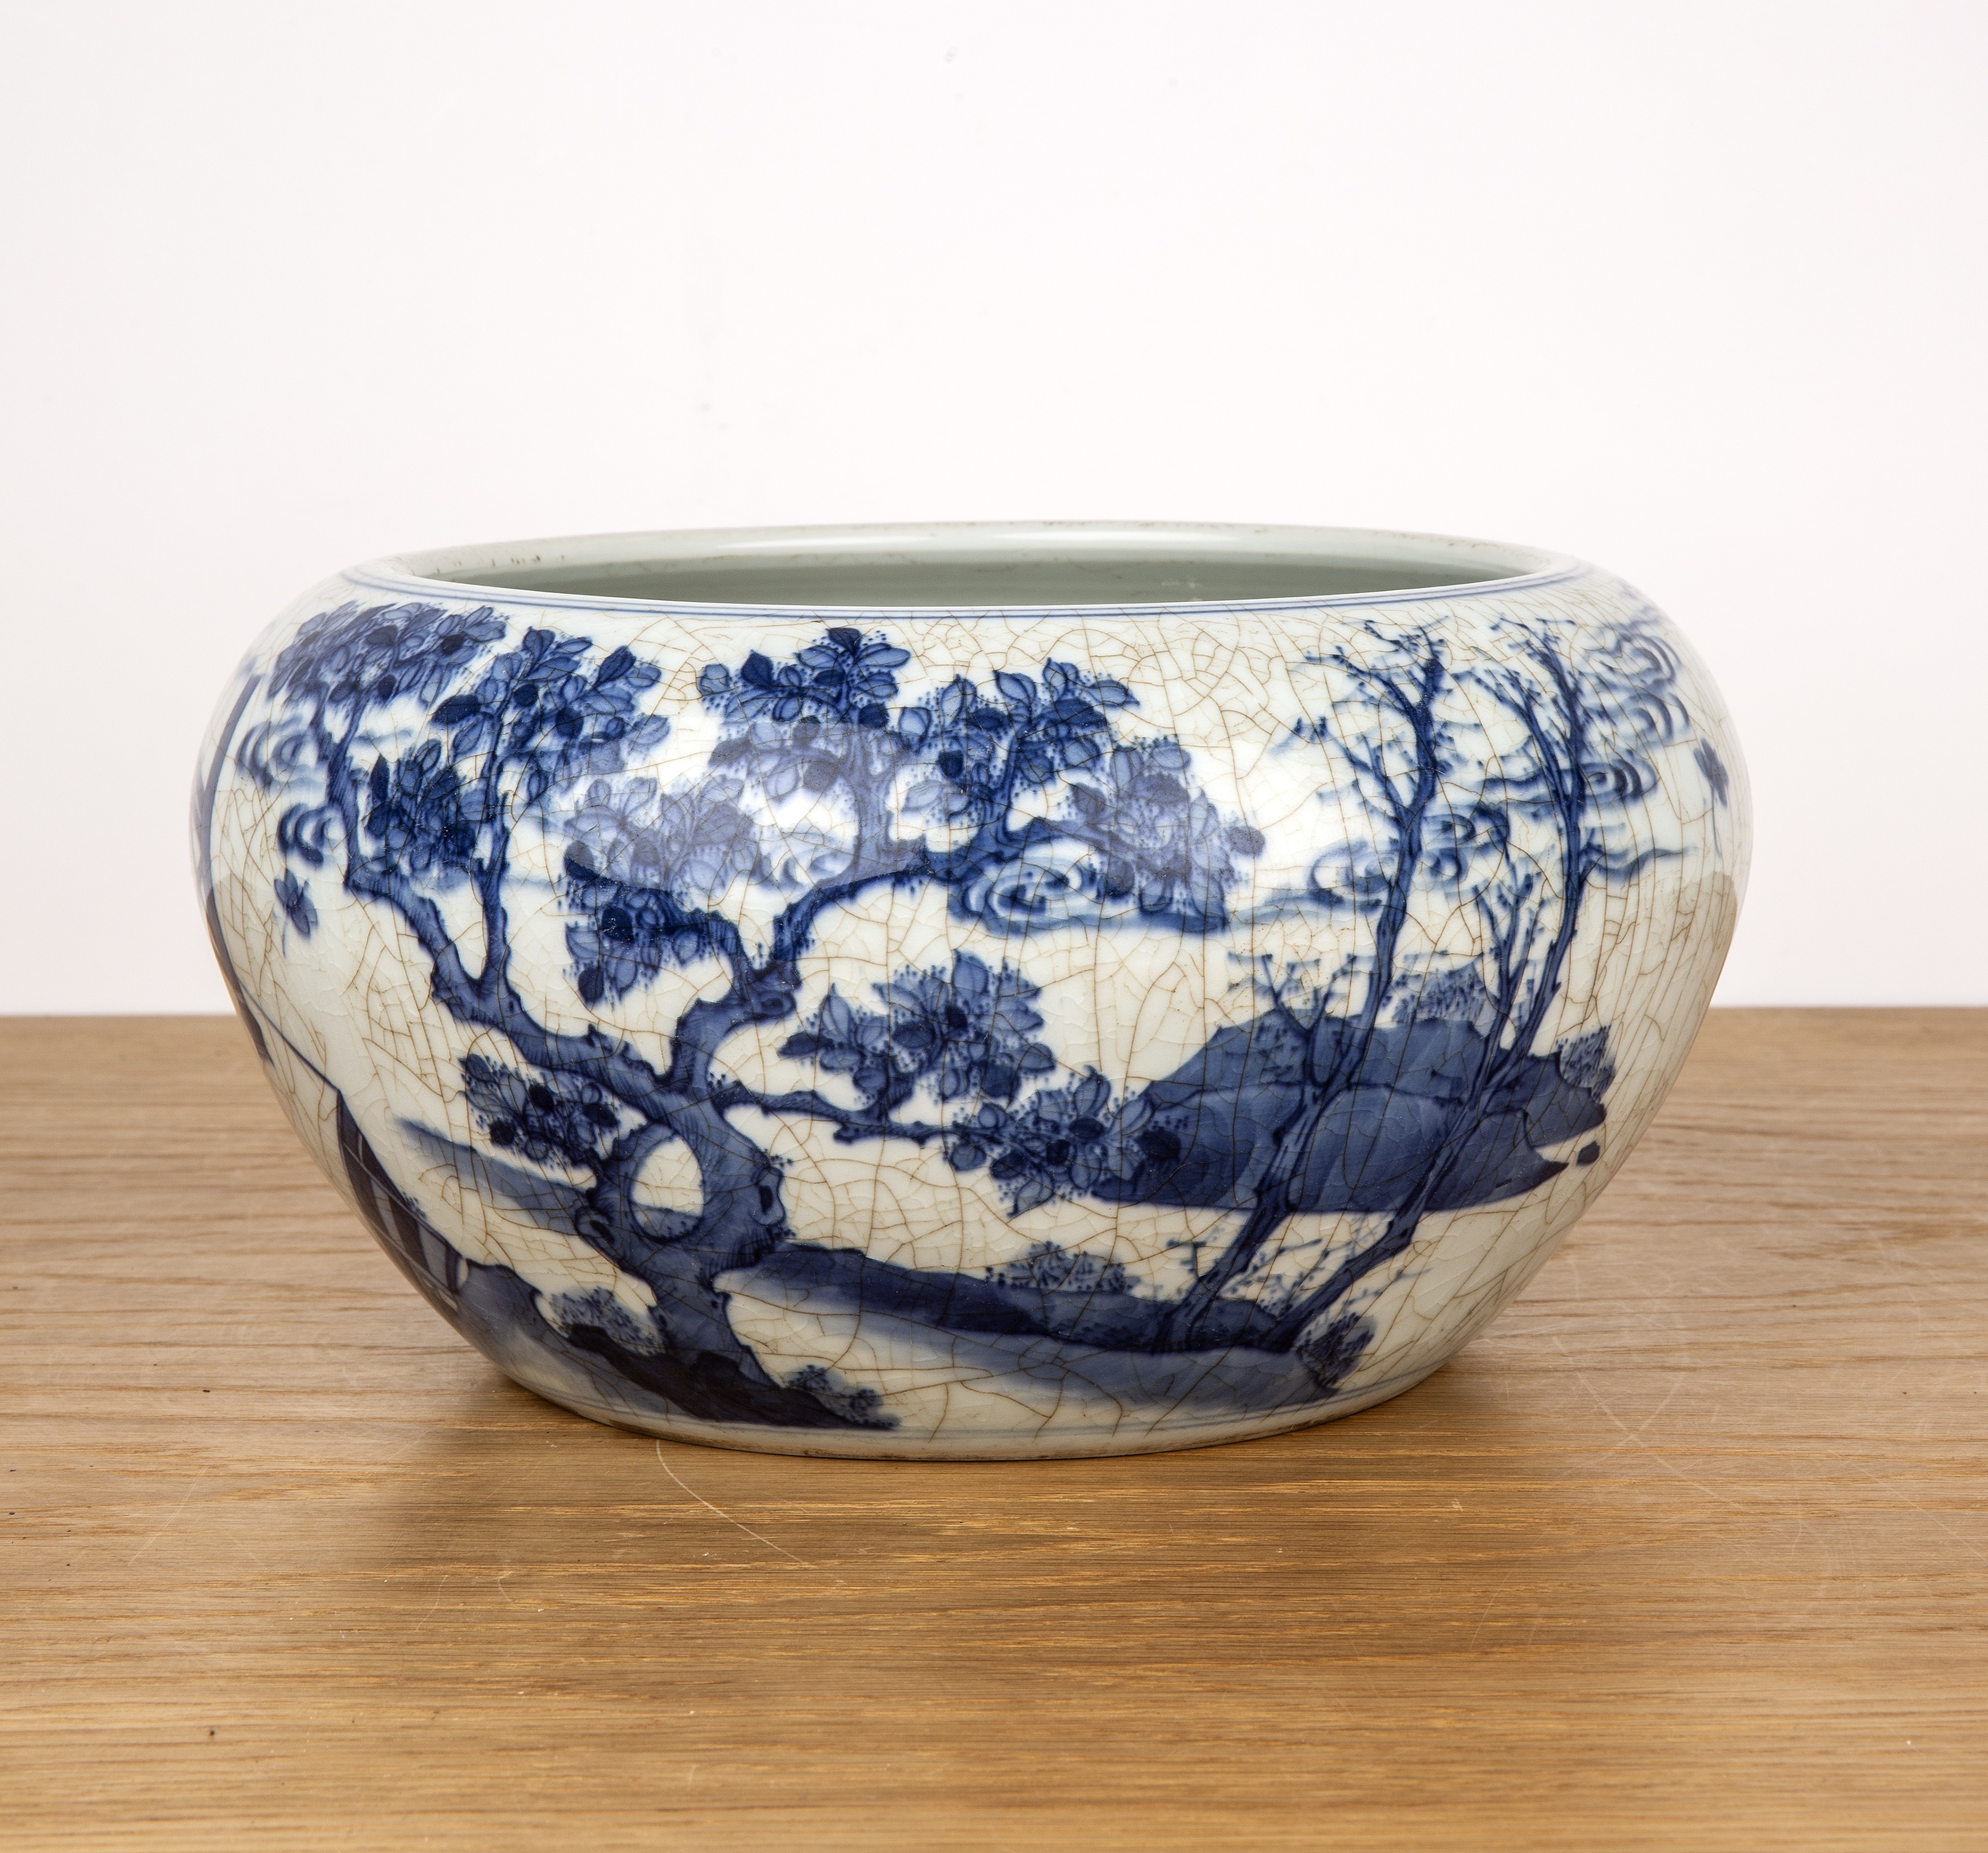 Cracked ice porcelain bowl Chinese, 19th Century painted with scholars around the side, 26cm